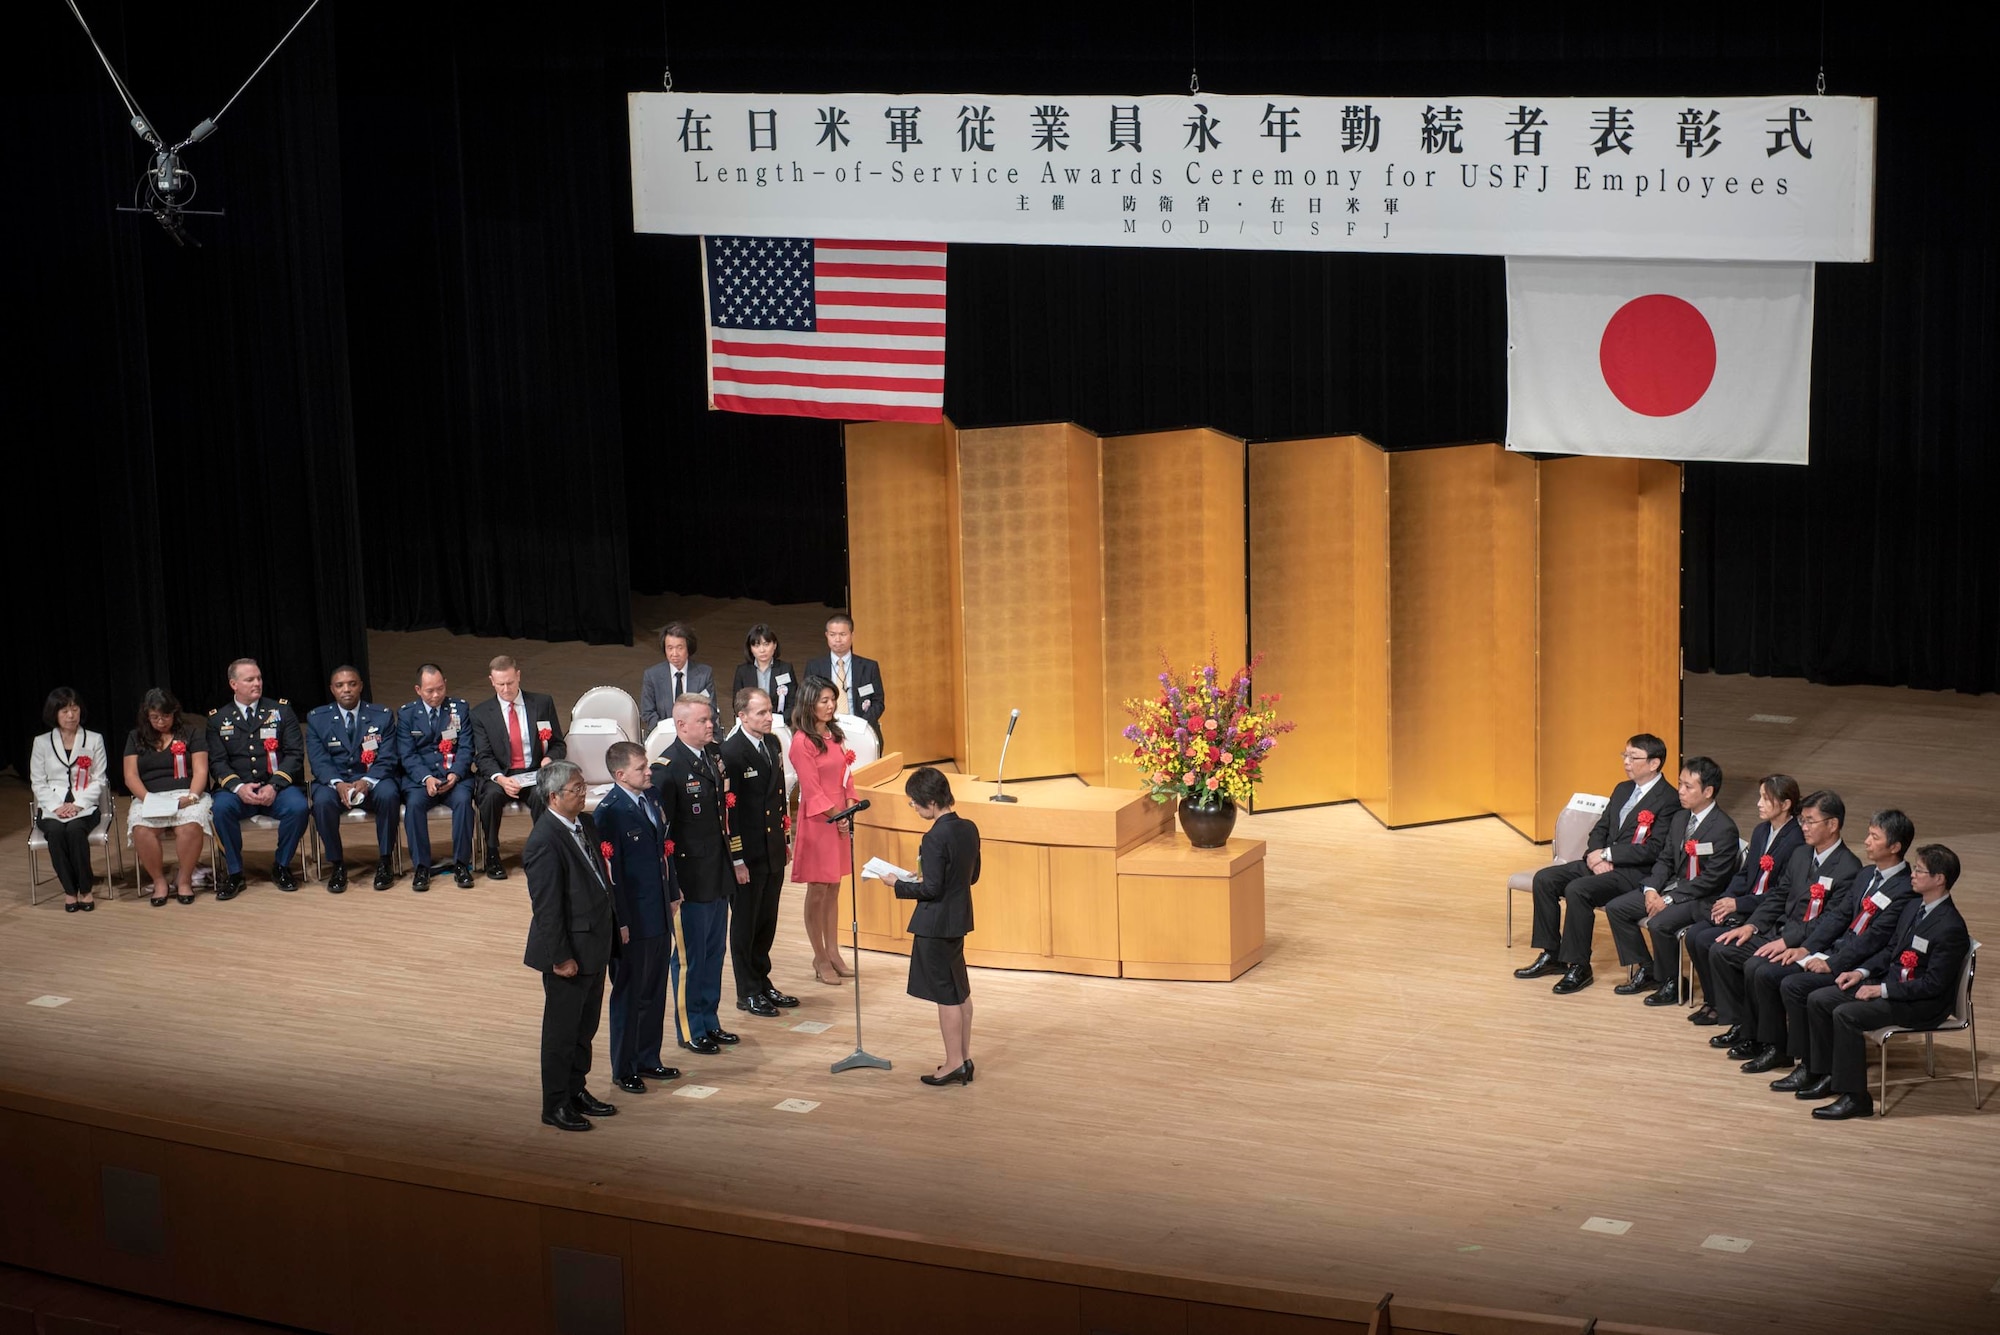 Reiko Ota, 374th Airlift Wing Chaplain administrative specialist, provides the thank you speech on behalf of all award recipients at the USFJ Length-of-Service Awards Ceremony at the Yutorogi Hall in Hamura City, Japan, Oct. 10, 2018.